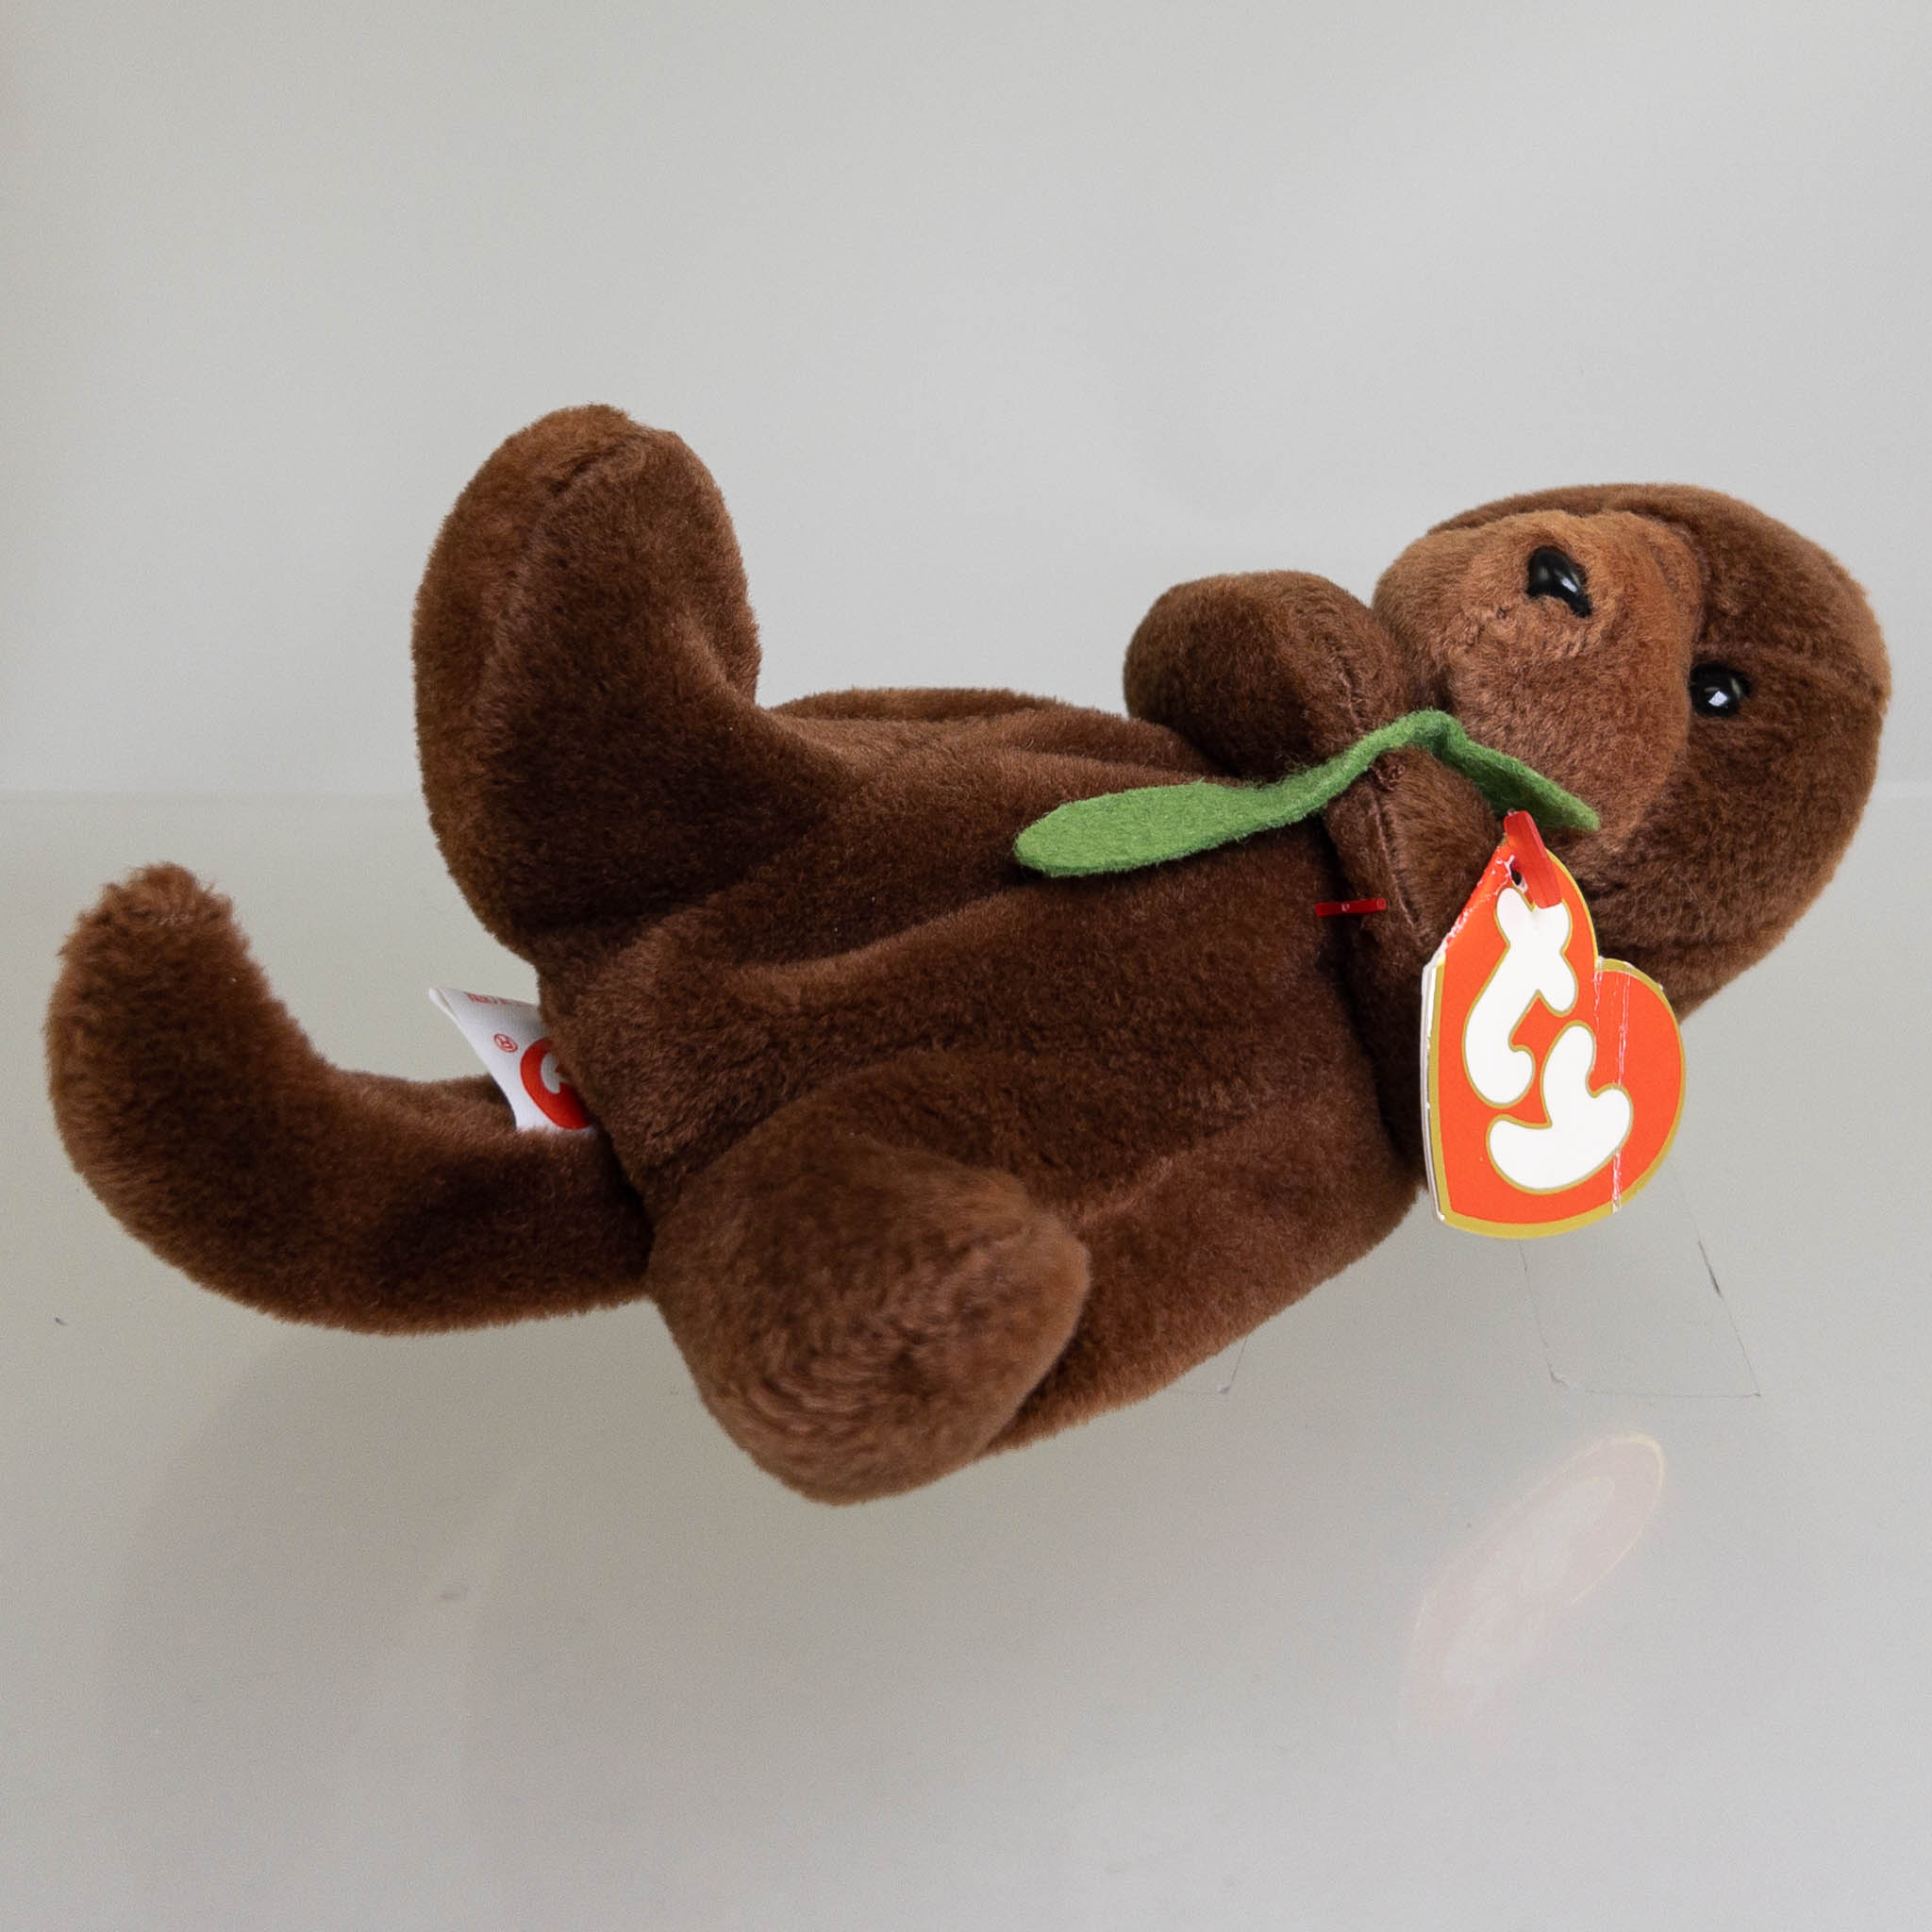 TY Beanie Baby - SEAWEED the Sea Otter (3rd Gen Hang Tag - MWCTs)